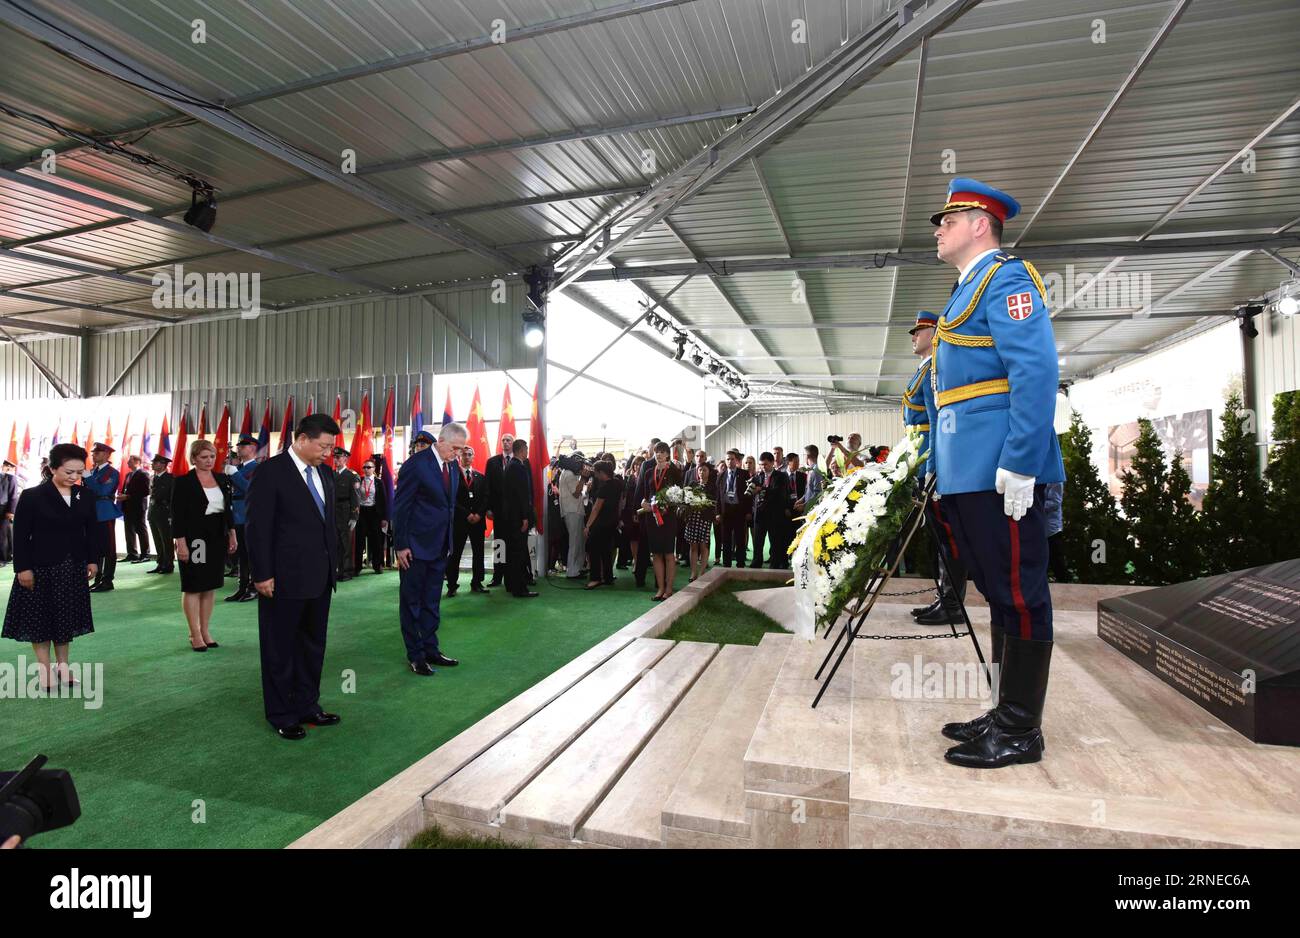 (160617) -- BELGRADE, June 17, 2016 -- Chinese President Xi Jinping and his wife Peng Liyuan pay homage to the Chinese martyrs killed in the NATO bombing of the former Chinese embassy in the Federal Republic of Yugoslavia in May 1999, after arriving in Belgrade for a state visit to Serbia, June 17, 2016. The three martyrs were journalists Shao Yunhuan of Xinhua News Agency, and Xu Xinghu and his wife Zhu Ying, of the Guangming Daily newspaper. )(wjq) SERBIA-BELGRADE-CHINA-XI JINPING-VISIT RaoxAimin PUBLICATIONxNOTxINxCHN   160617 Belgrade June 17 2016 Chinese President Xi Jinping and His wife Stock Photo